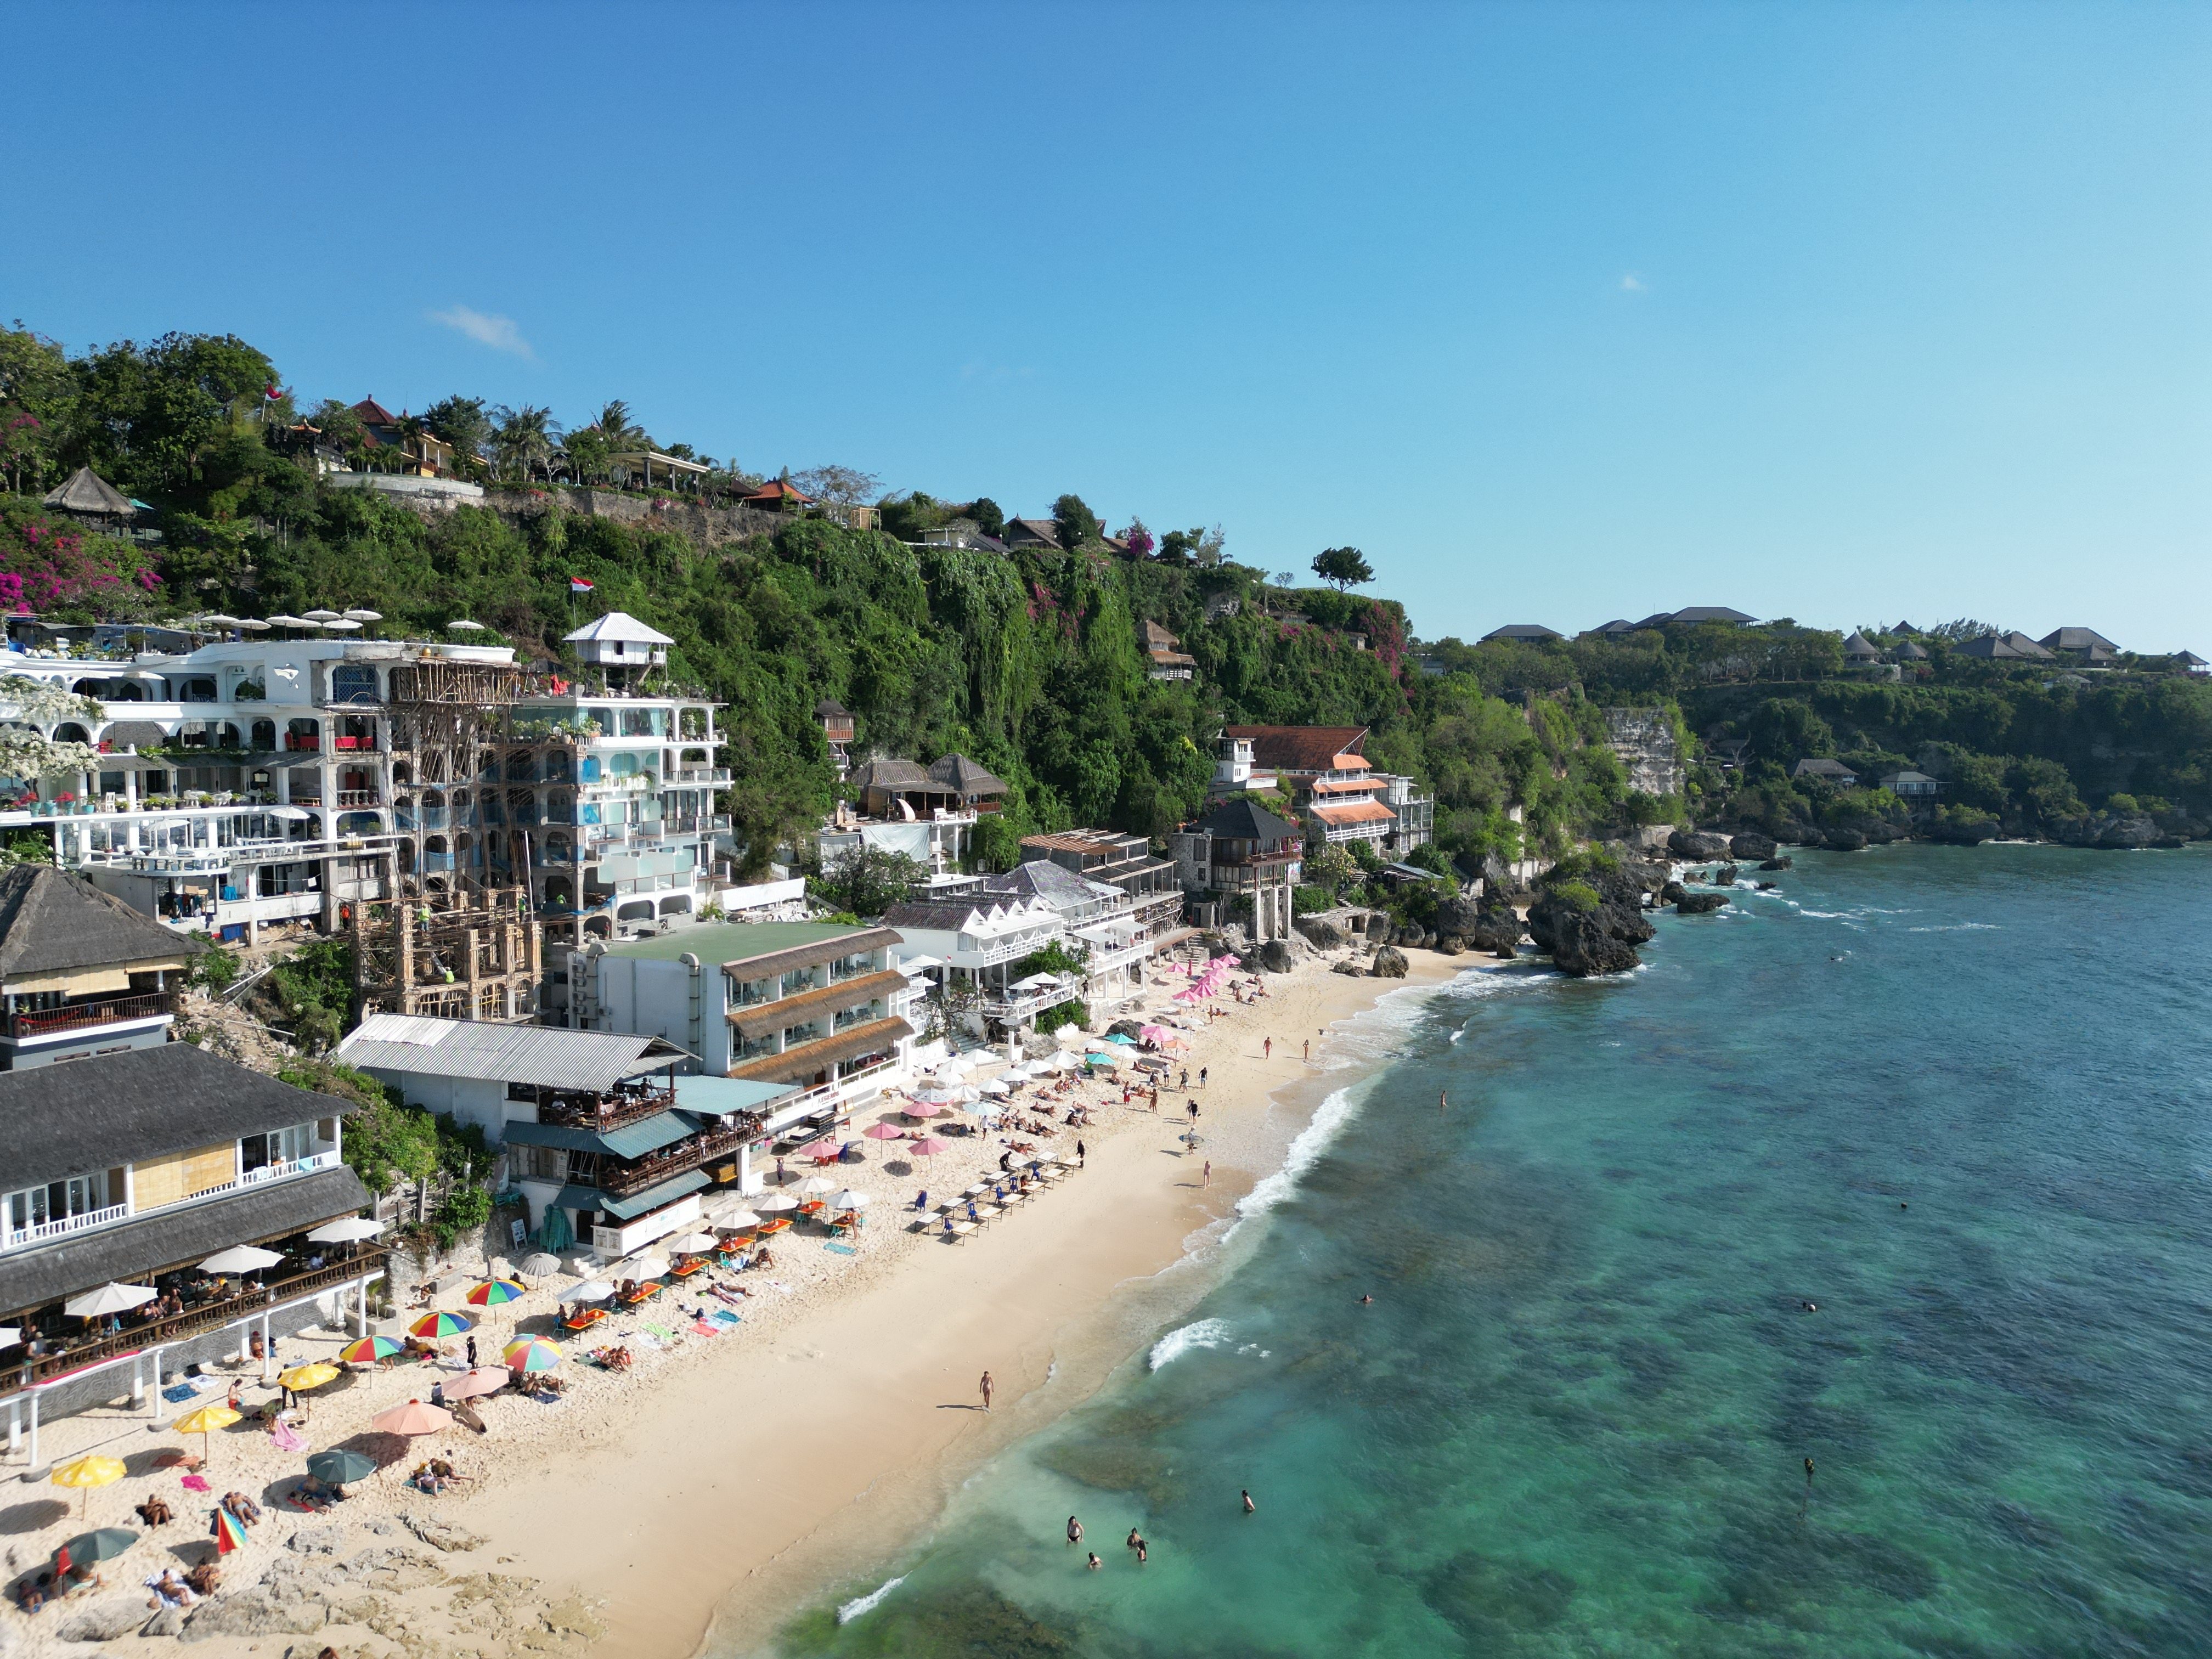 A beach in Bali. The housing market on the Indonesia island is gaining momentum, according to property agents. Photo: Handout